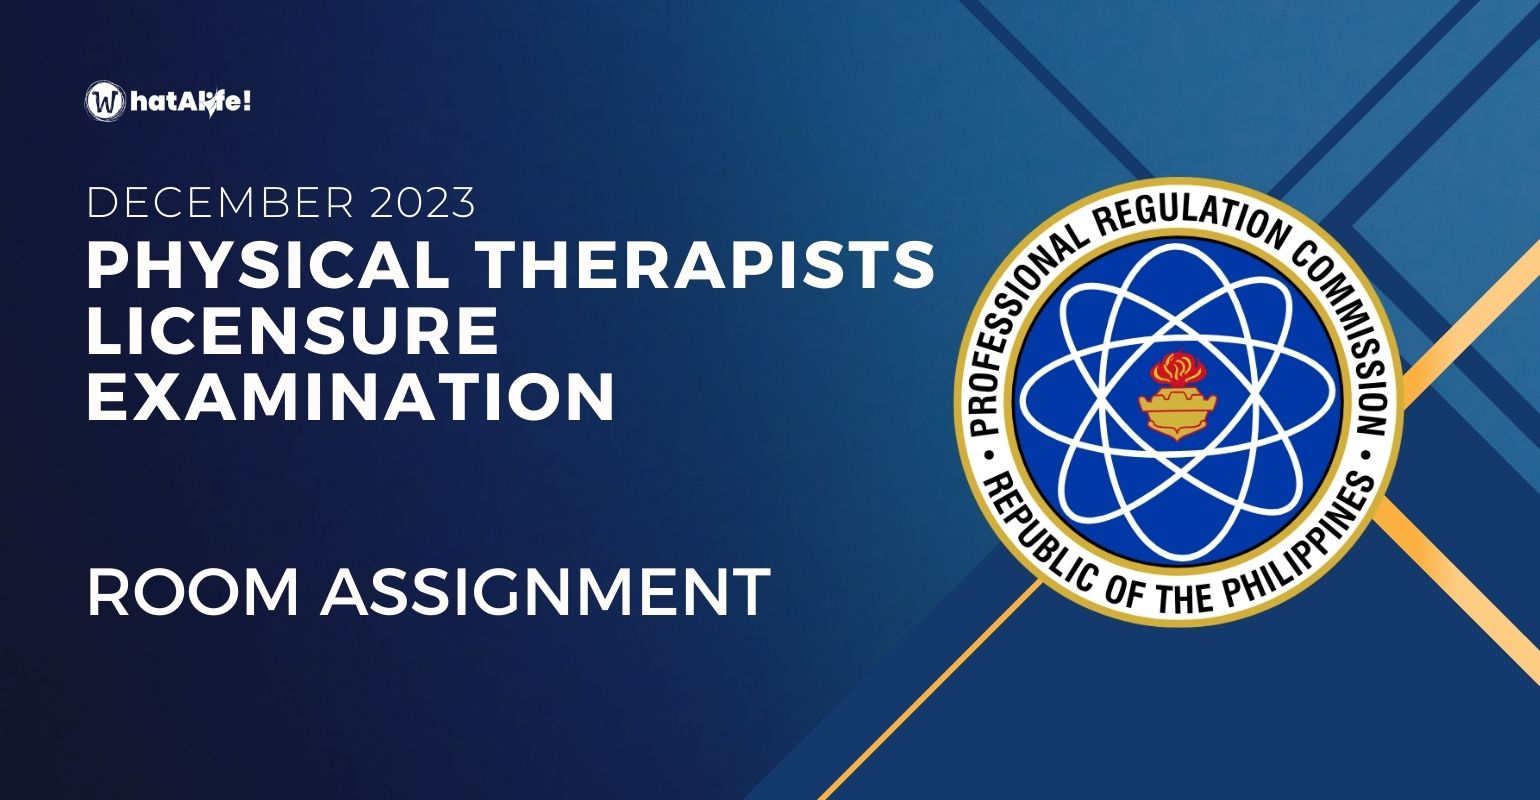 Room Assignment — December 2023 Physical Therapists Licensure Exam